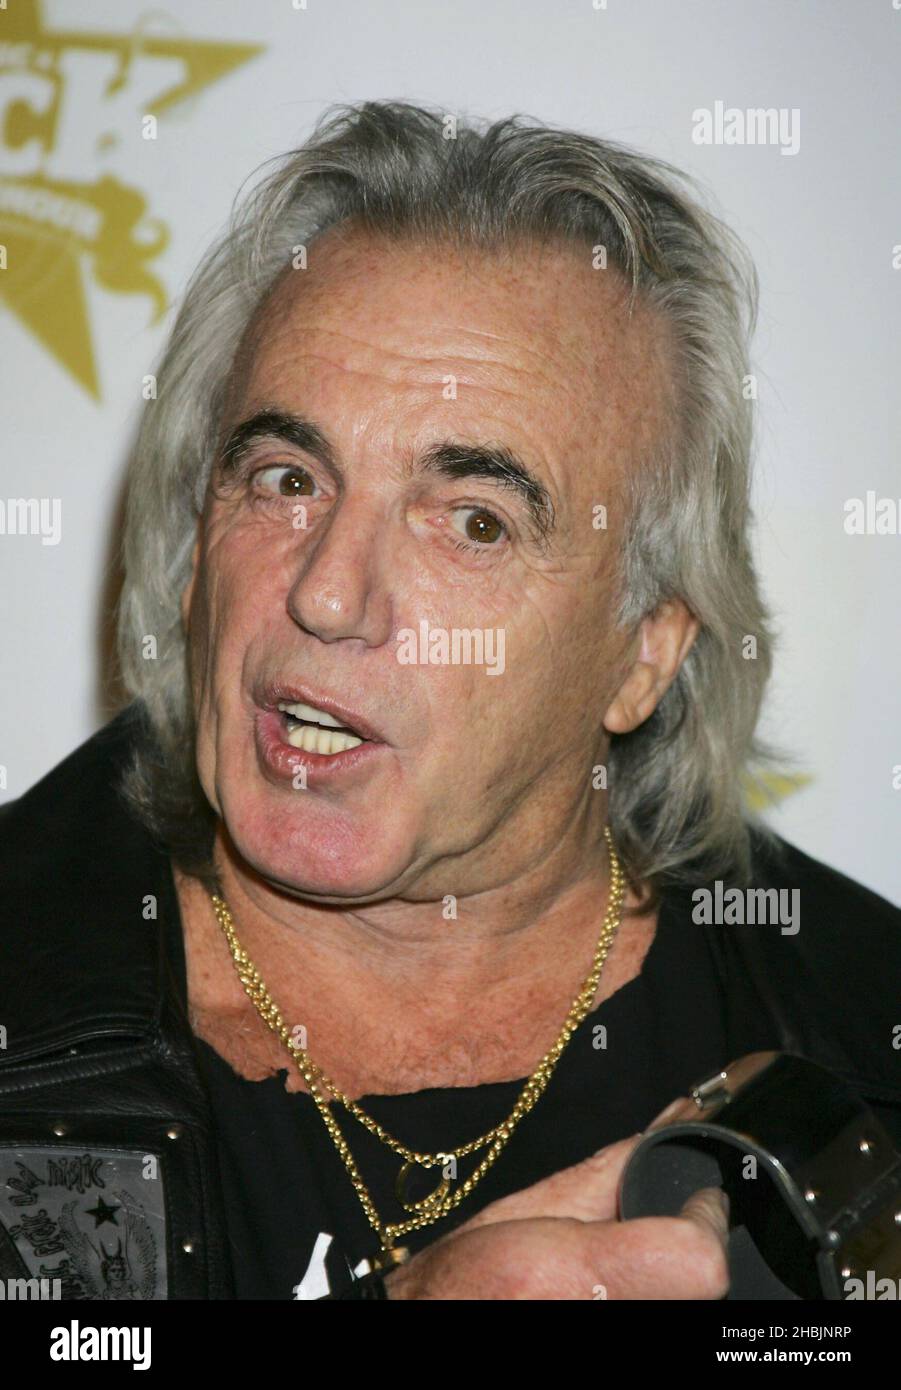 Peter Stringfellow arrives at the Classic Rock Roll Of Honour, the music magazine's inaugural awards, at Cafe de Paris on October 4, 2005 in London. Stock Photo